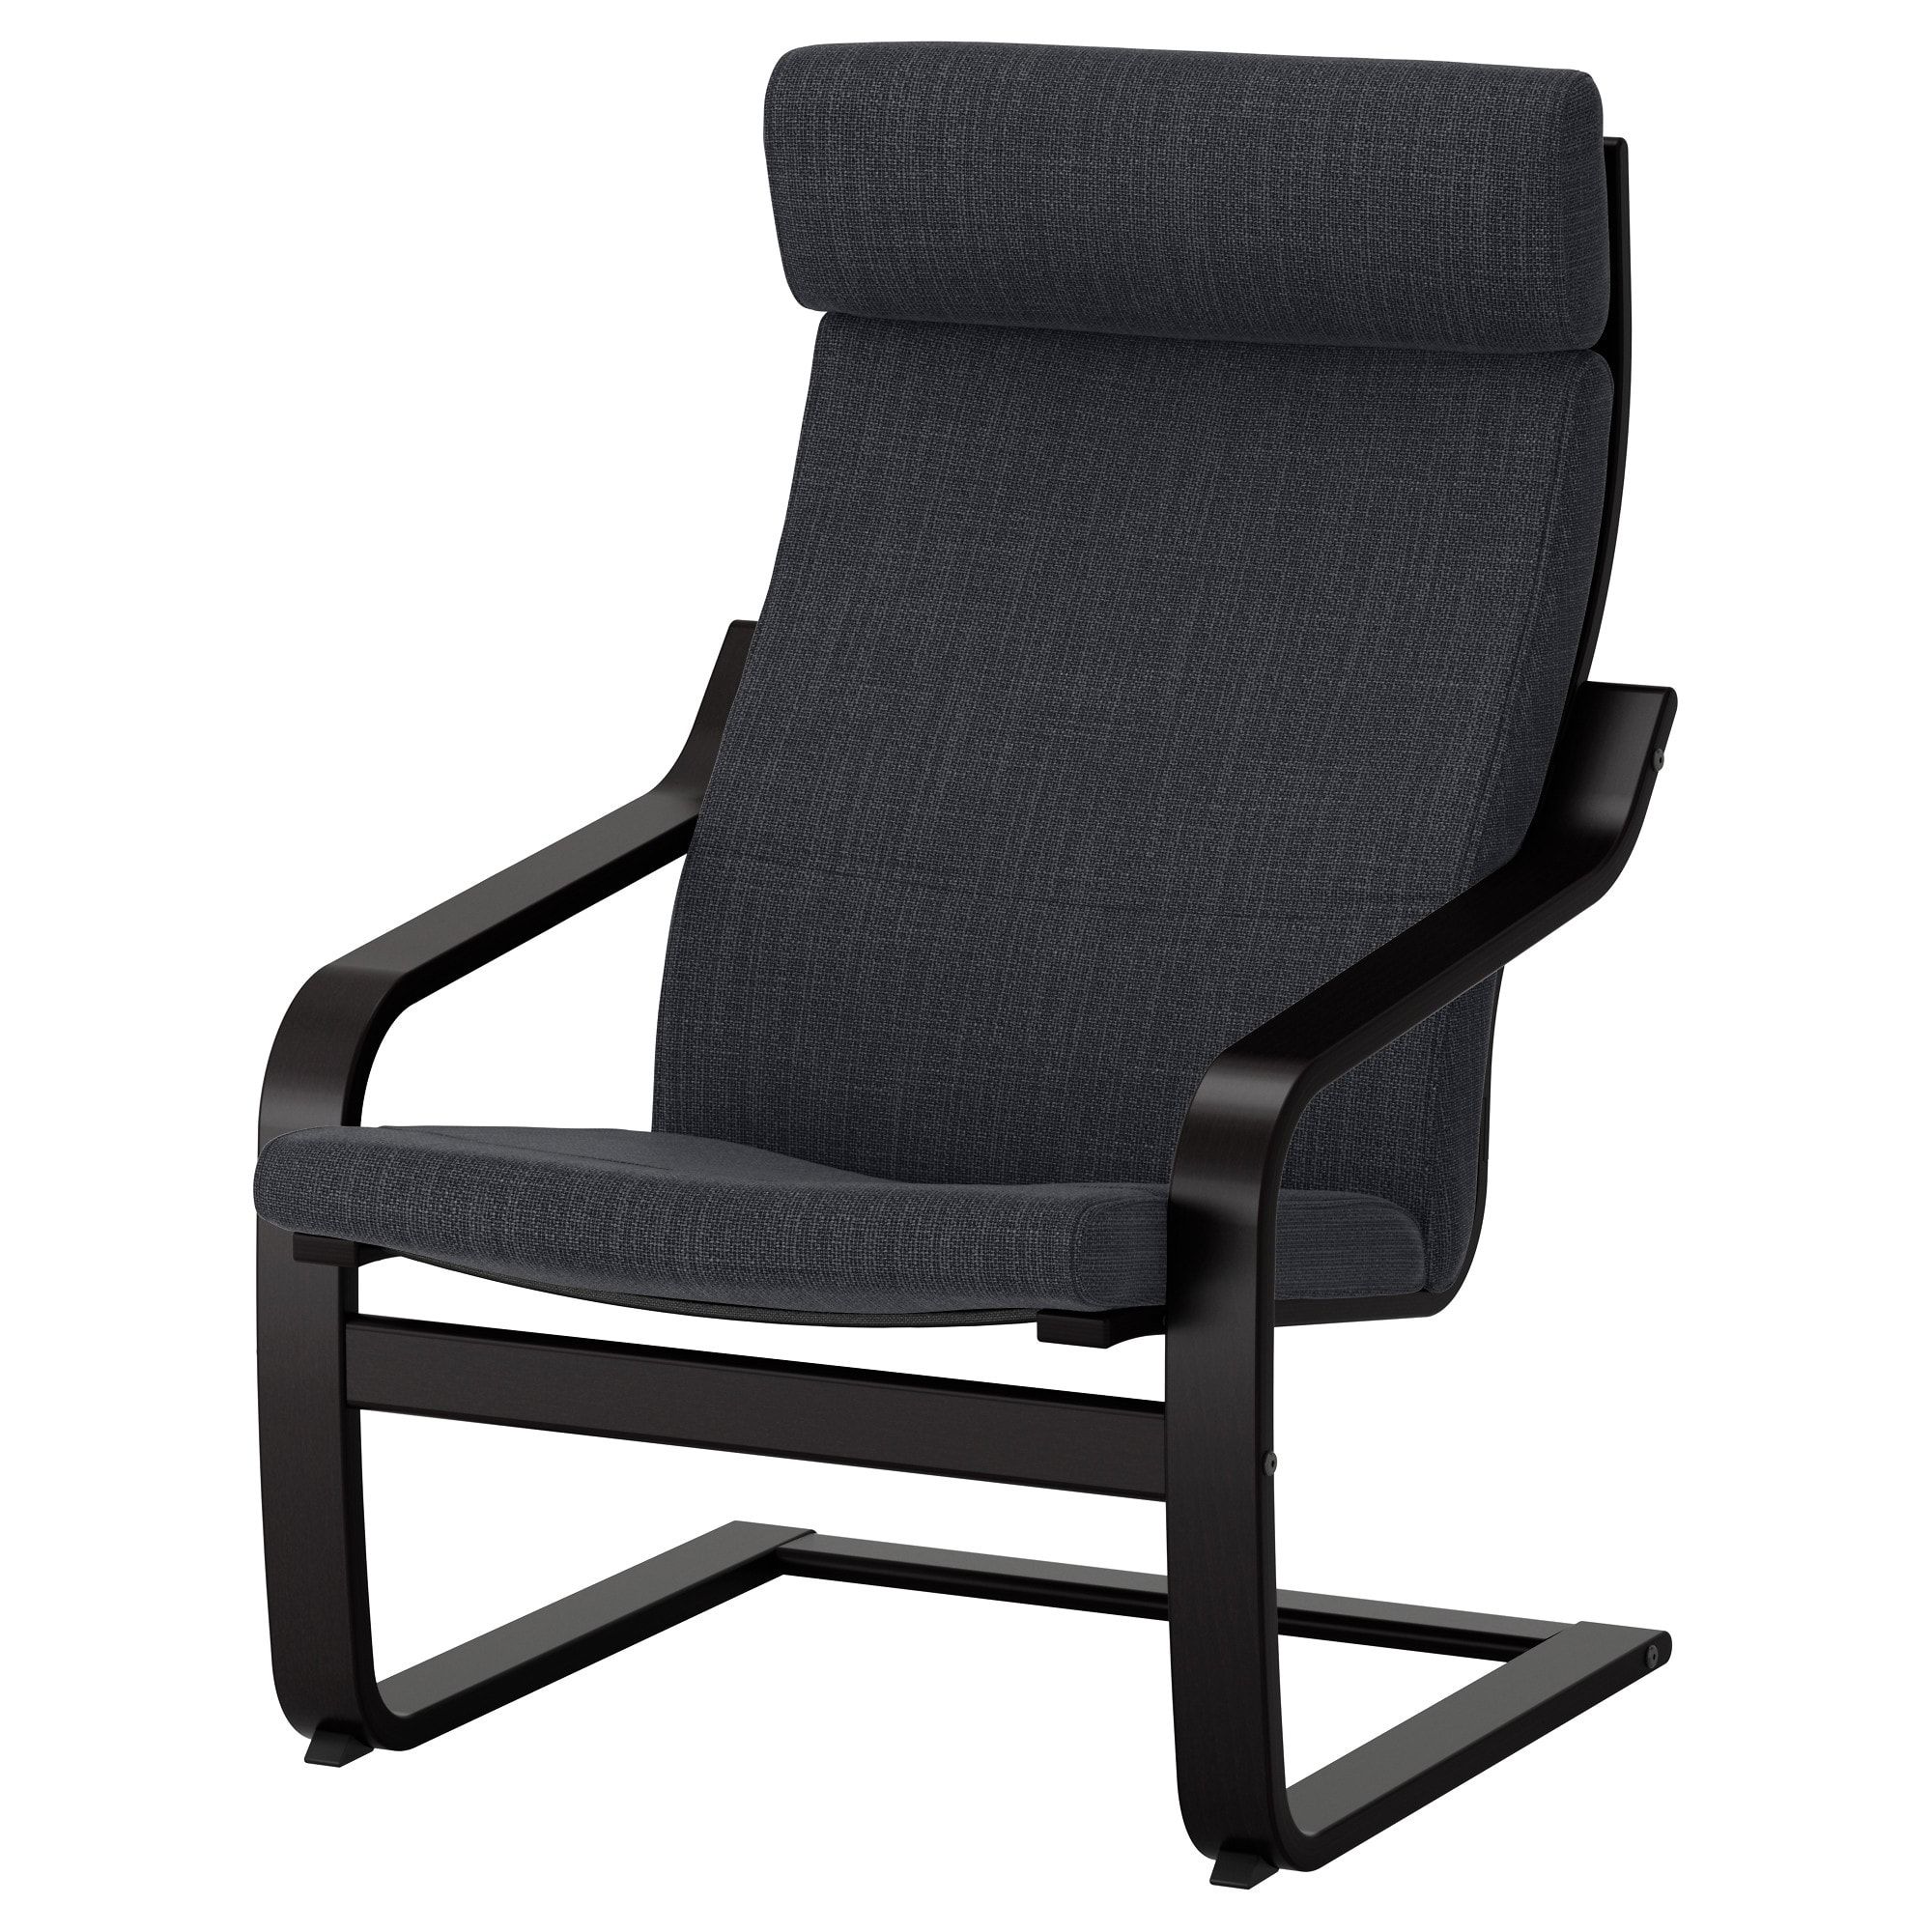 Armchairs & Recliner Chairs | Ikea For Ikea Rocking Chairs (View 3 of 15)